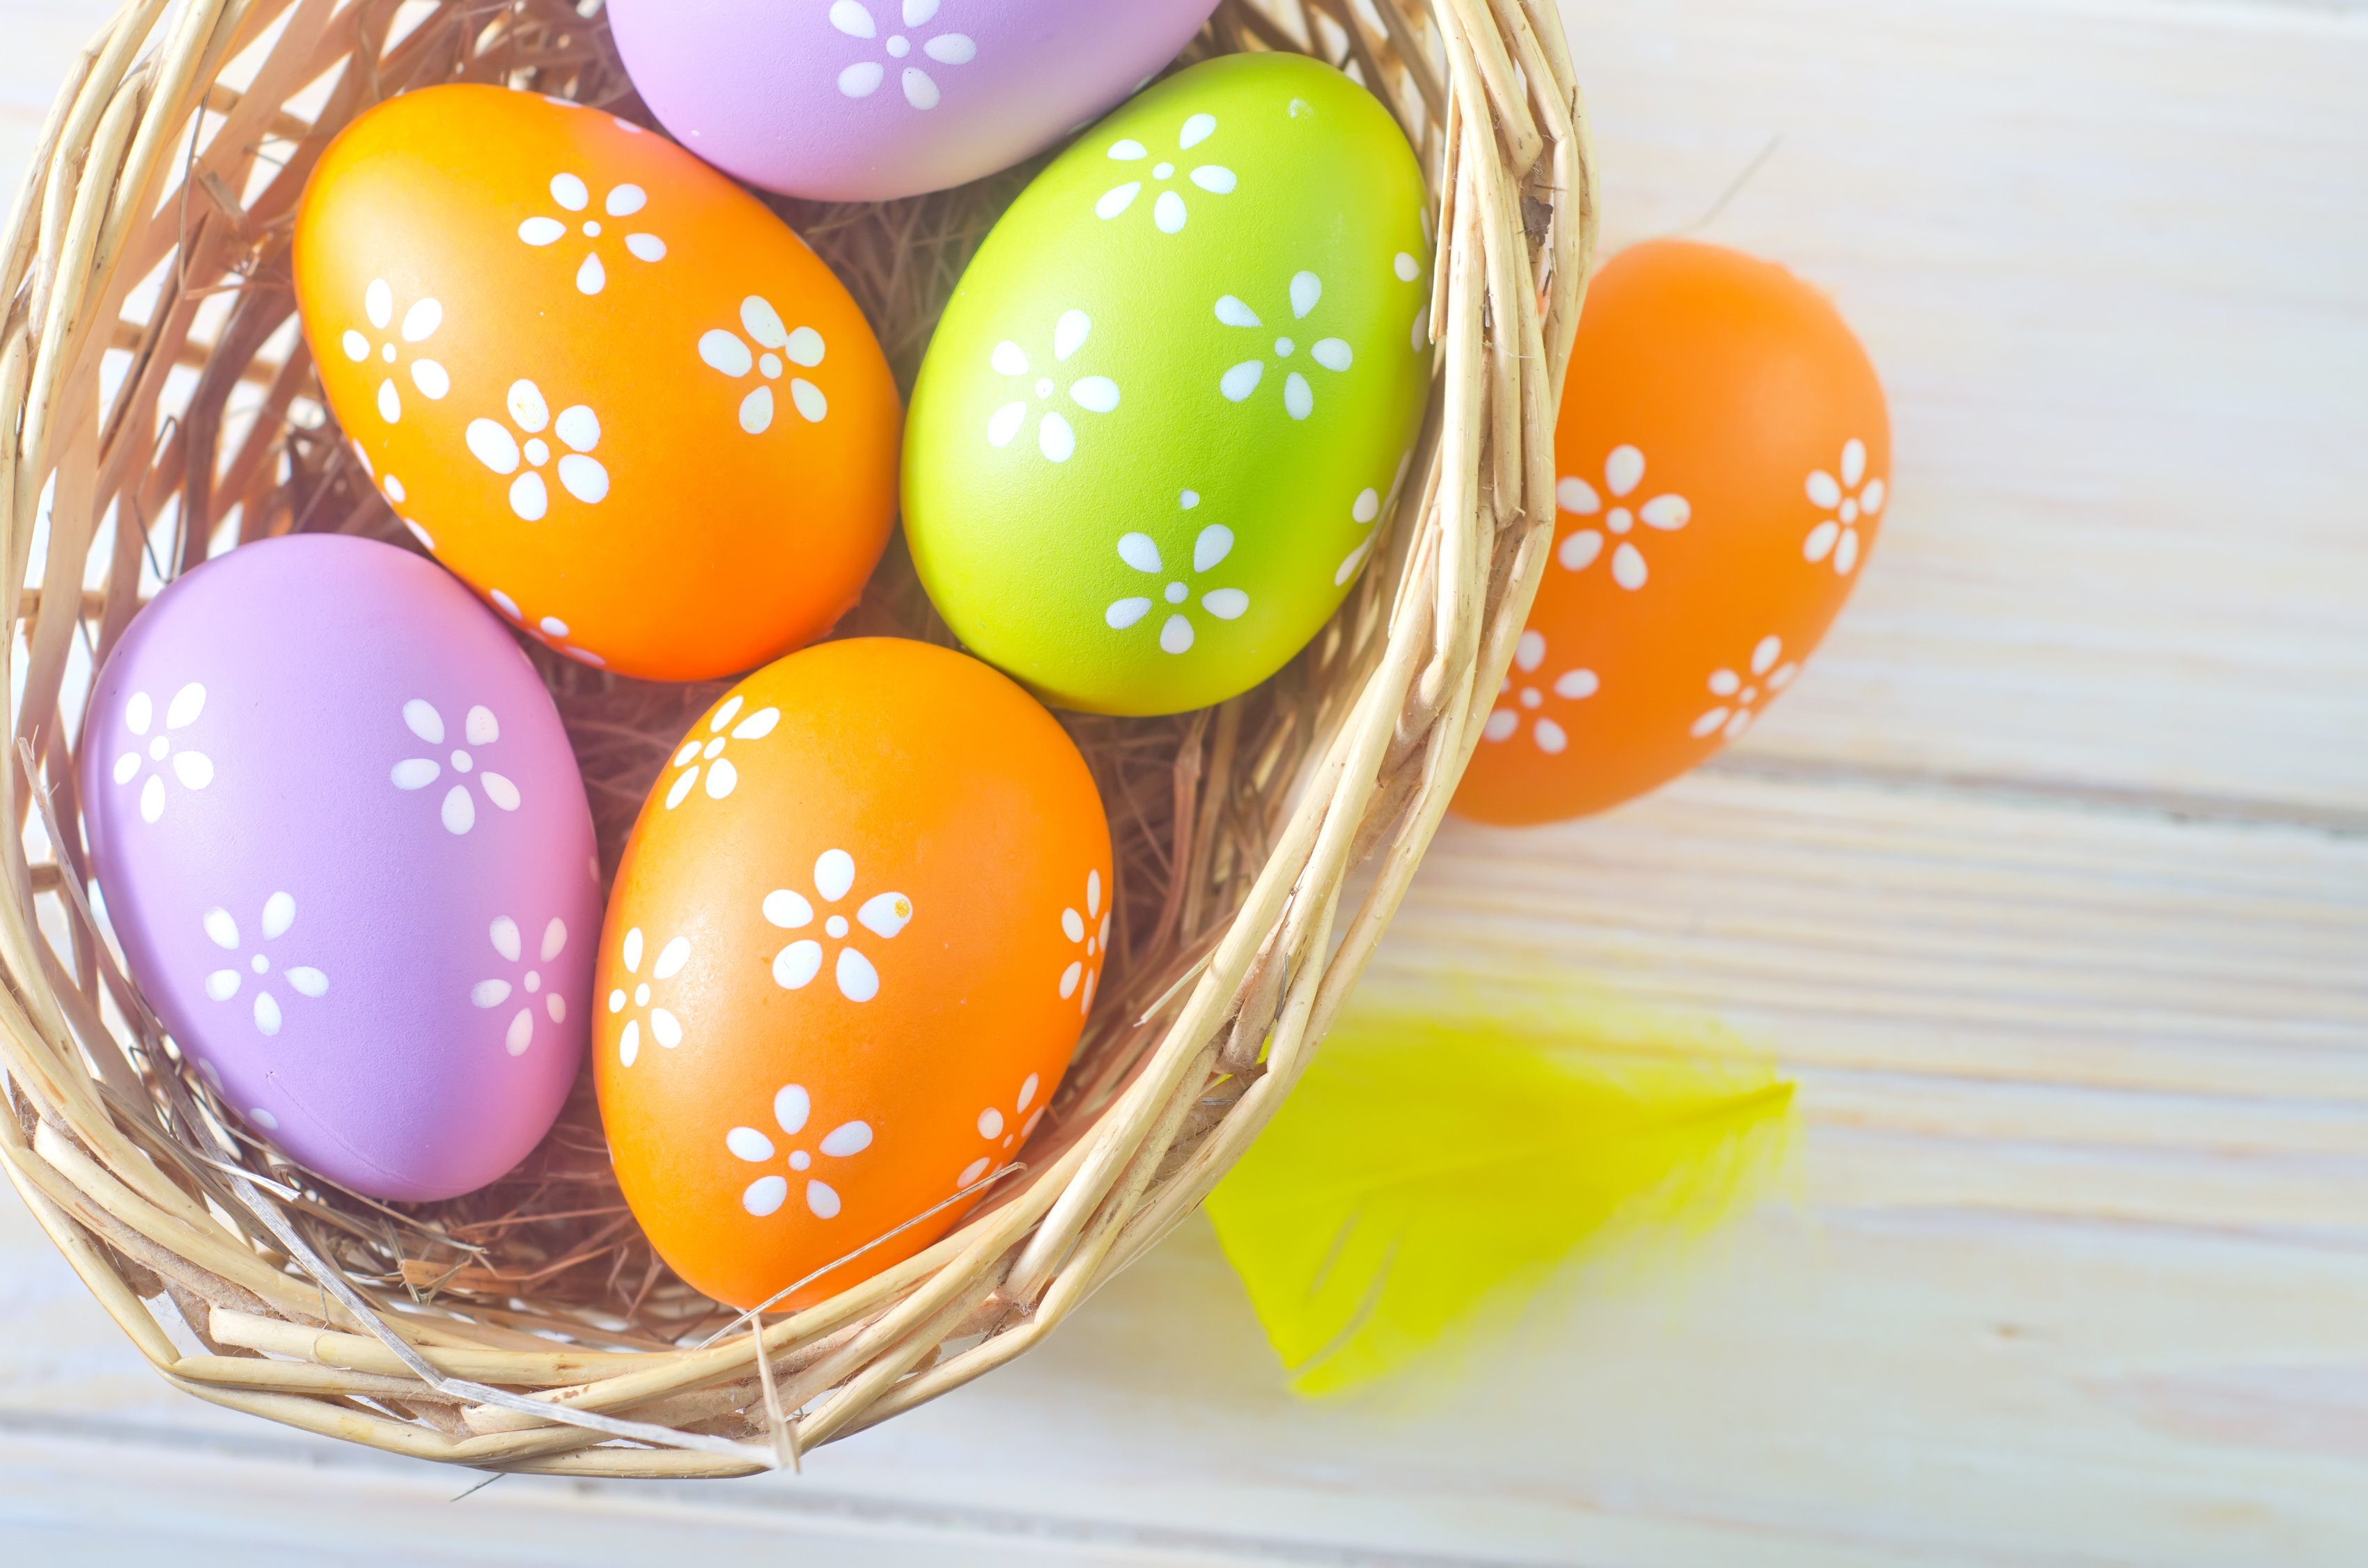 this photo is of a basket of colorfully decorated Easter eggs